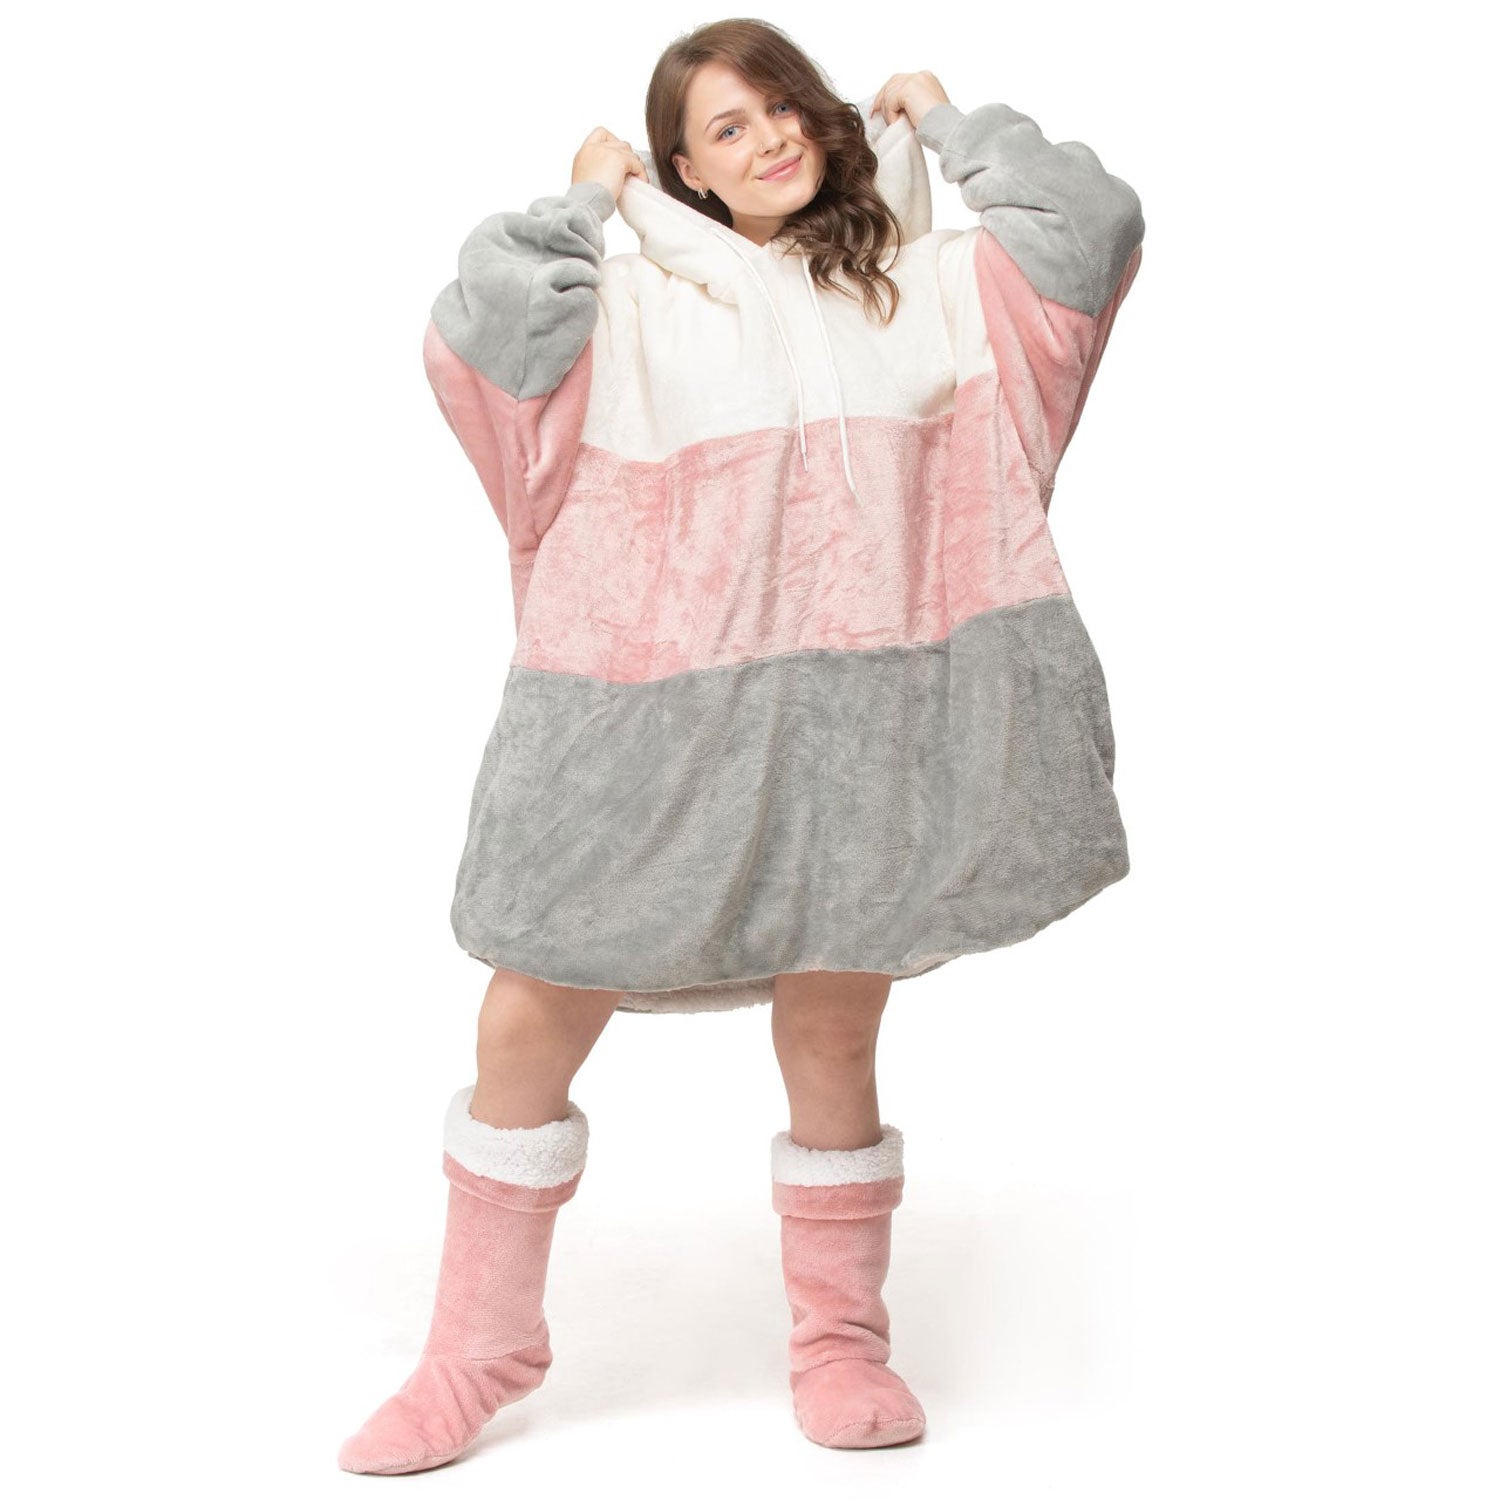 The Home Block Hooded Robe - White, Pink &amp; Grey 1 Shaws Department Stores